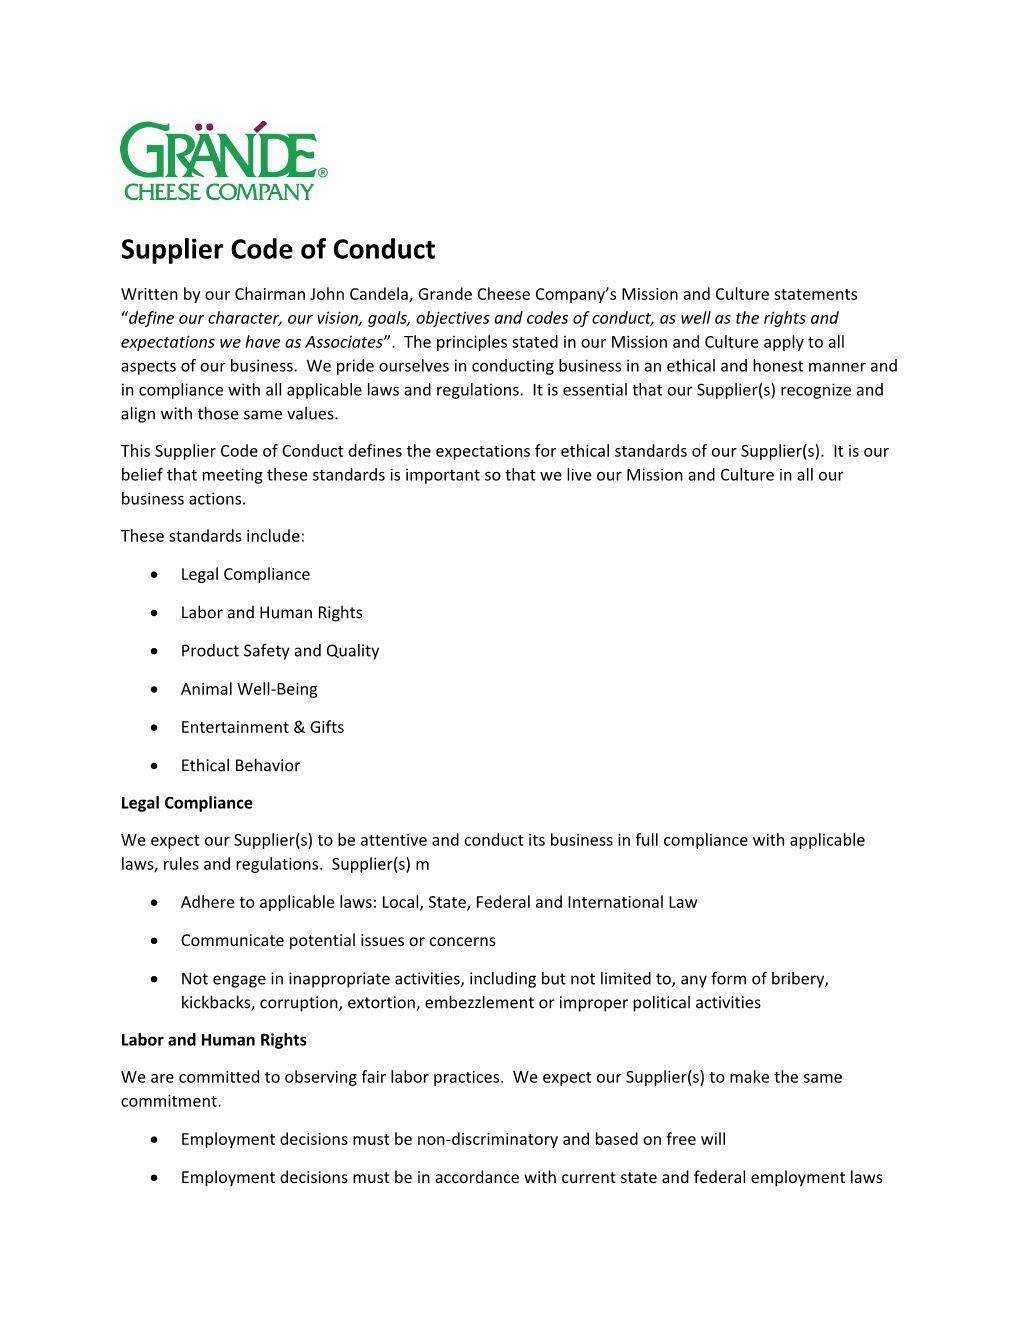 Supplier Code of Conduct FINAL